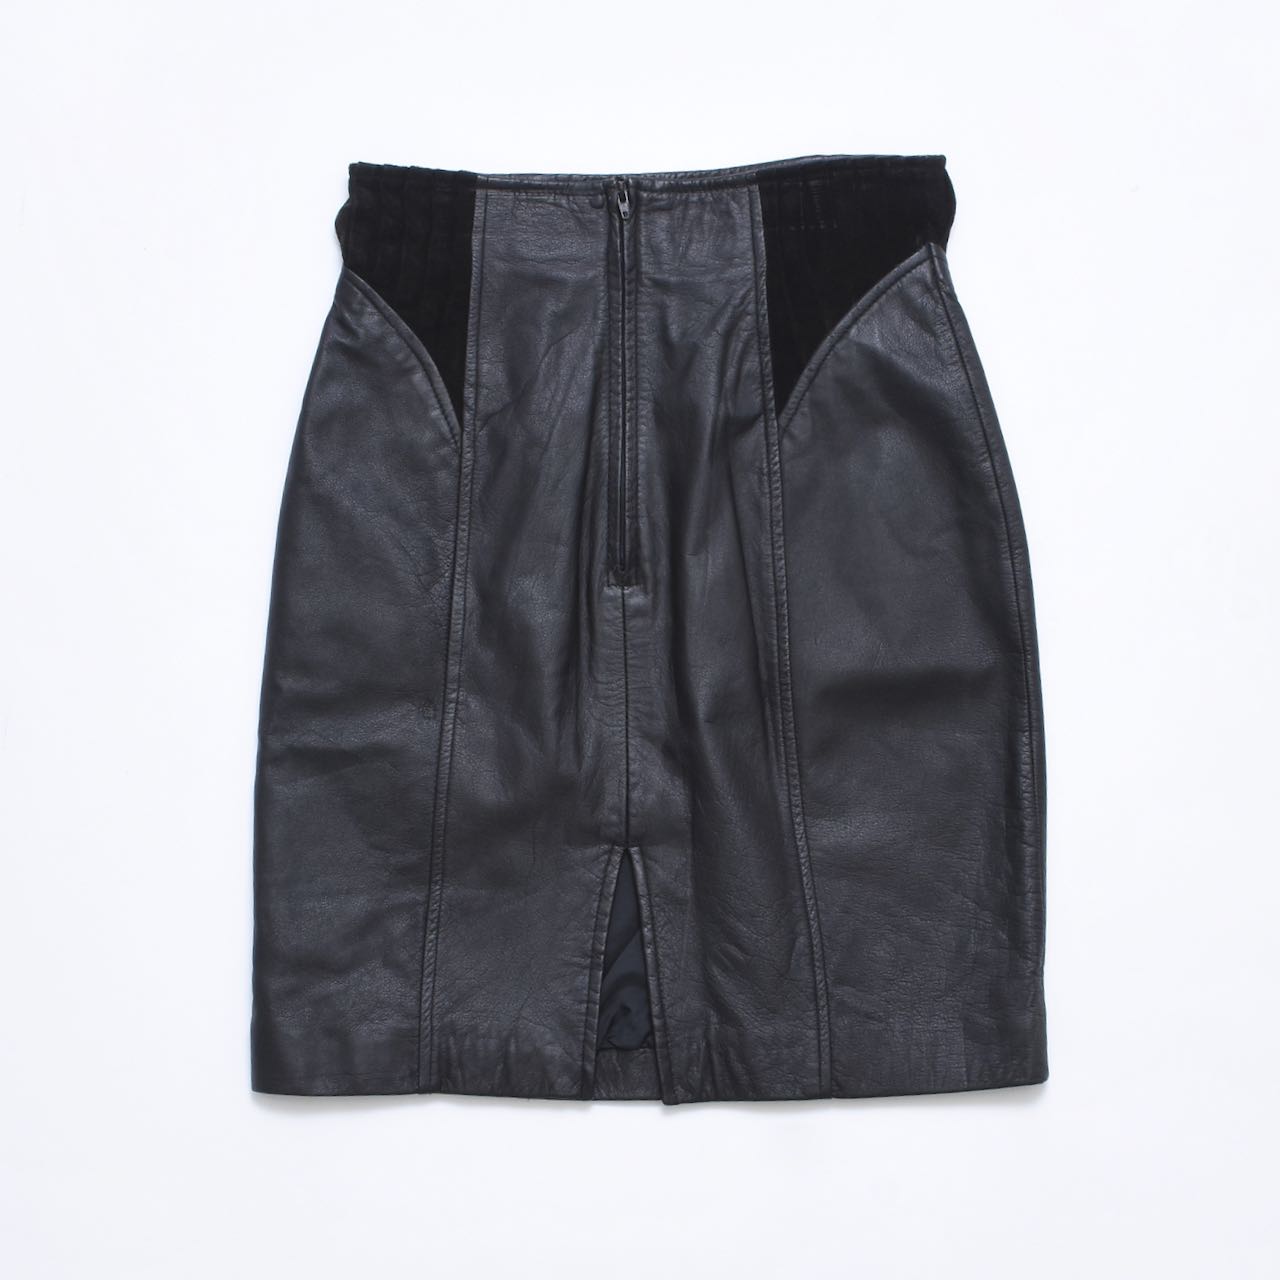 HdN "Suede Waist" Leather Skirt, Vintage Select